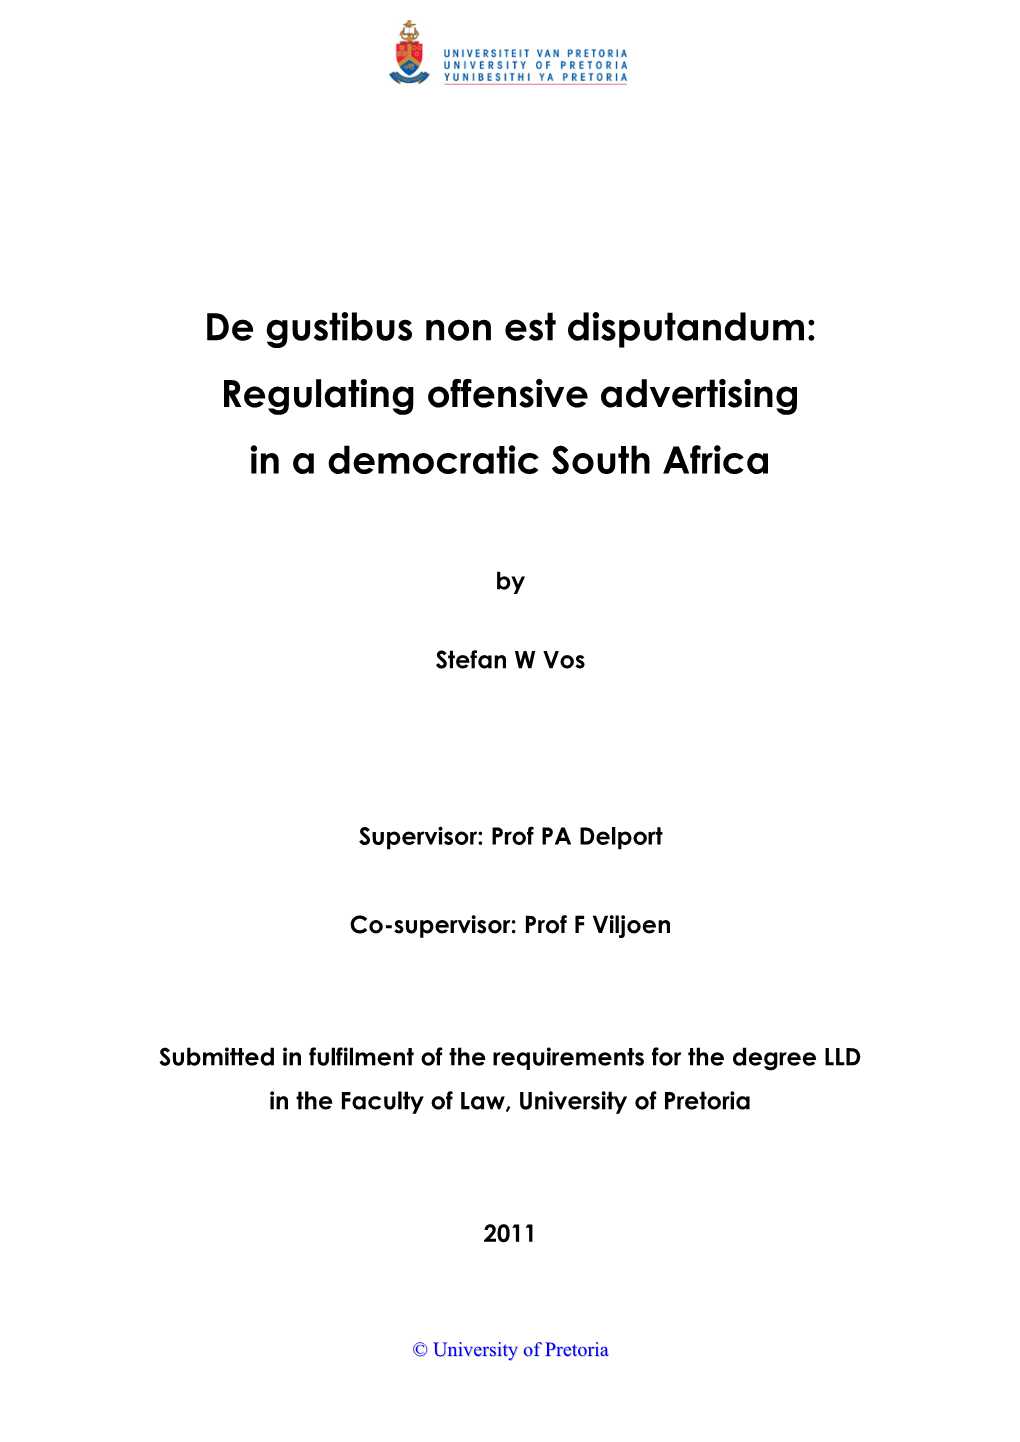 Regulating Offensive Advertising in a Democratic South Africa